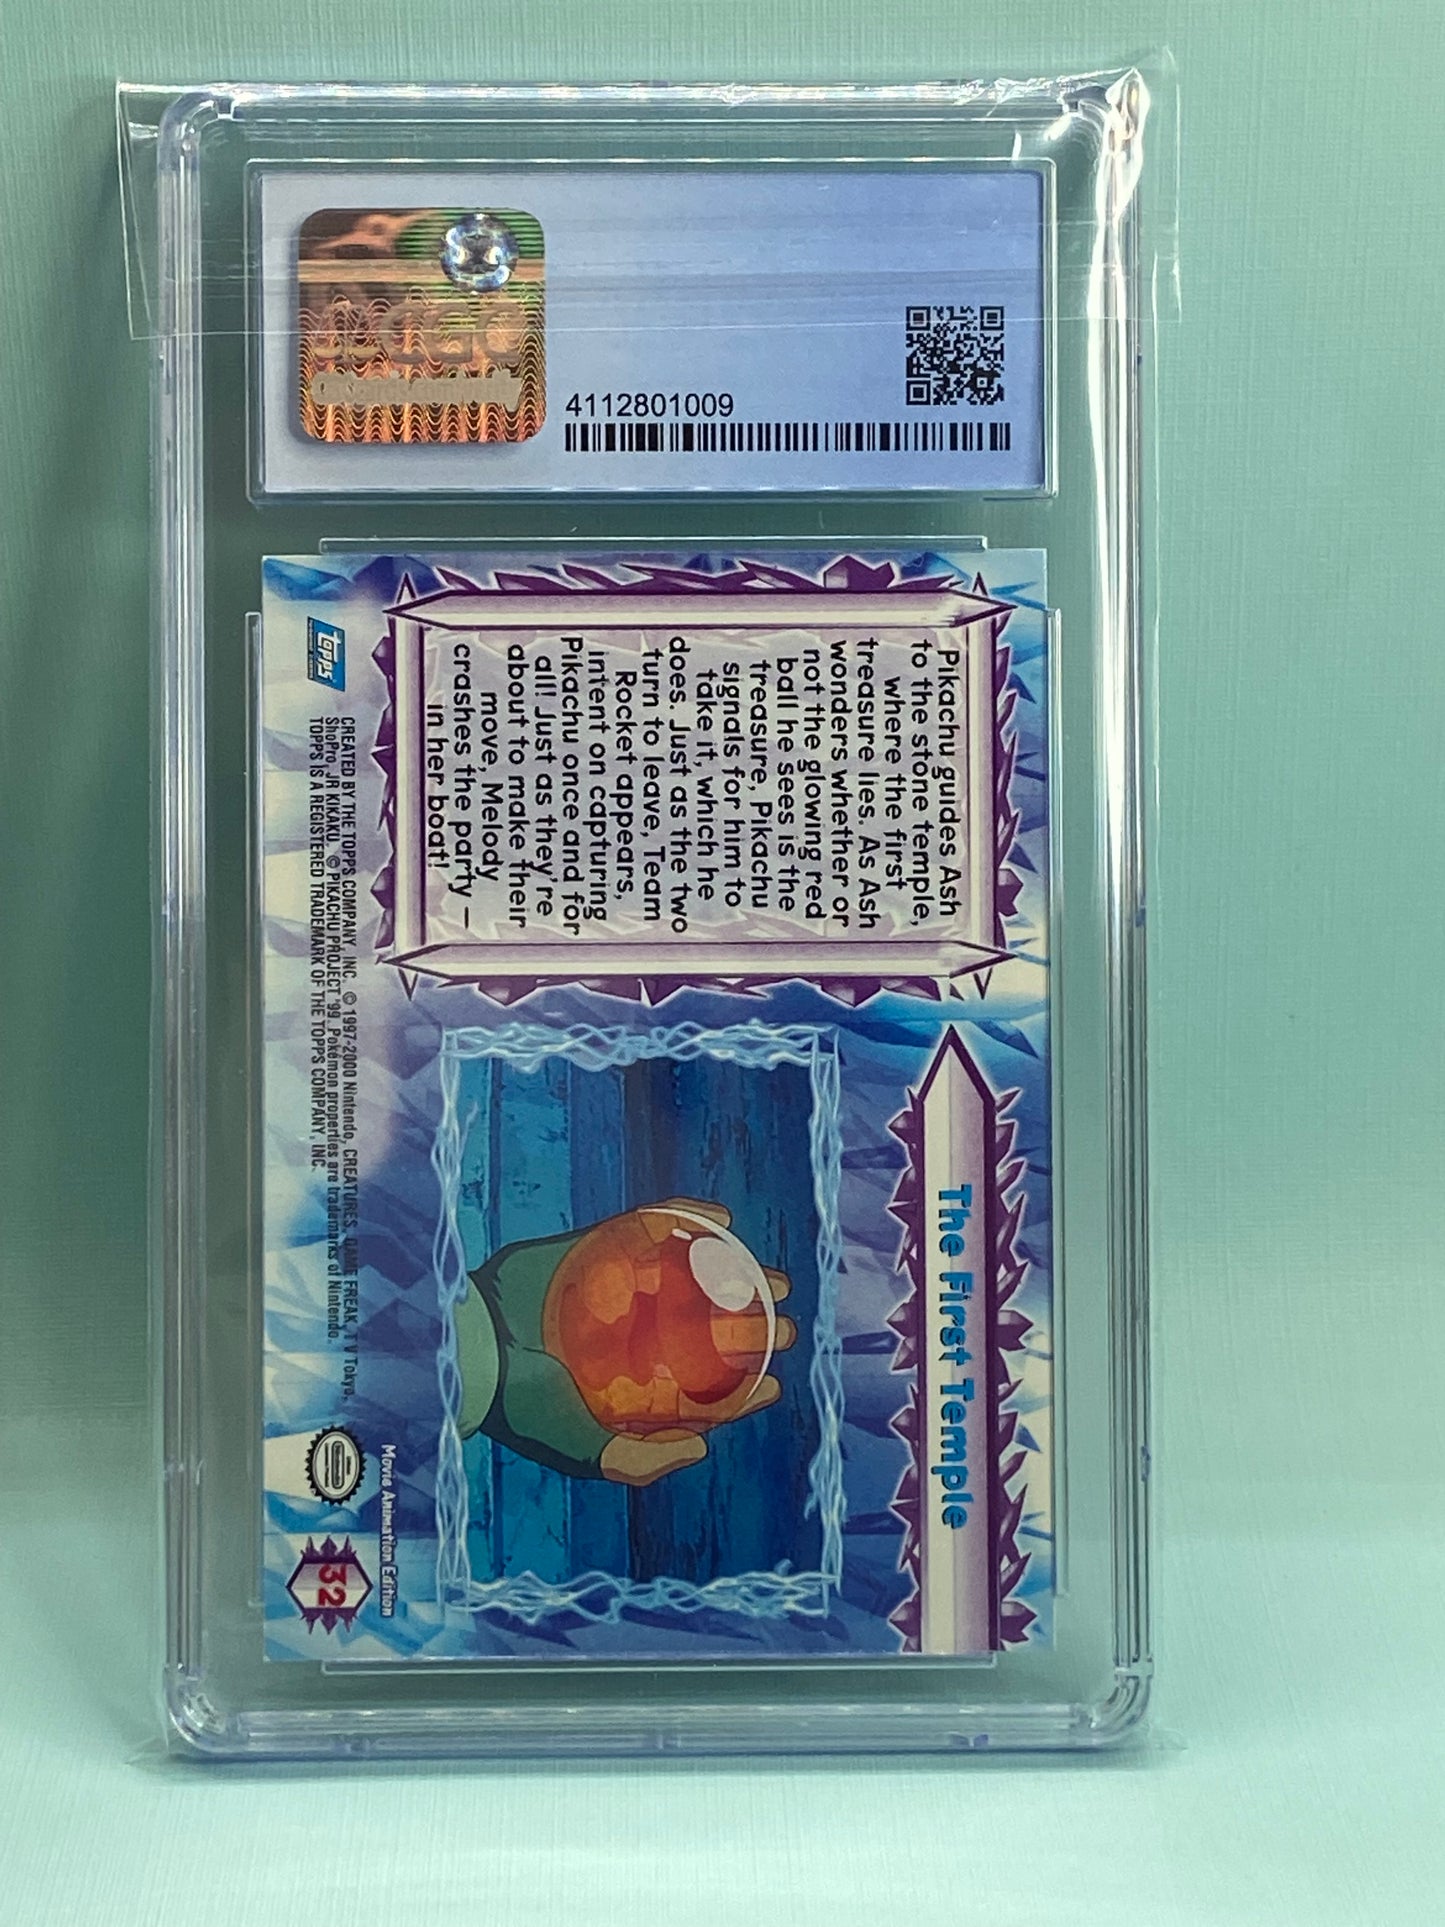 The First Temple Topps Pokemon the Movie Pikachu Ash #32 CGC 8.5